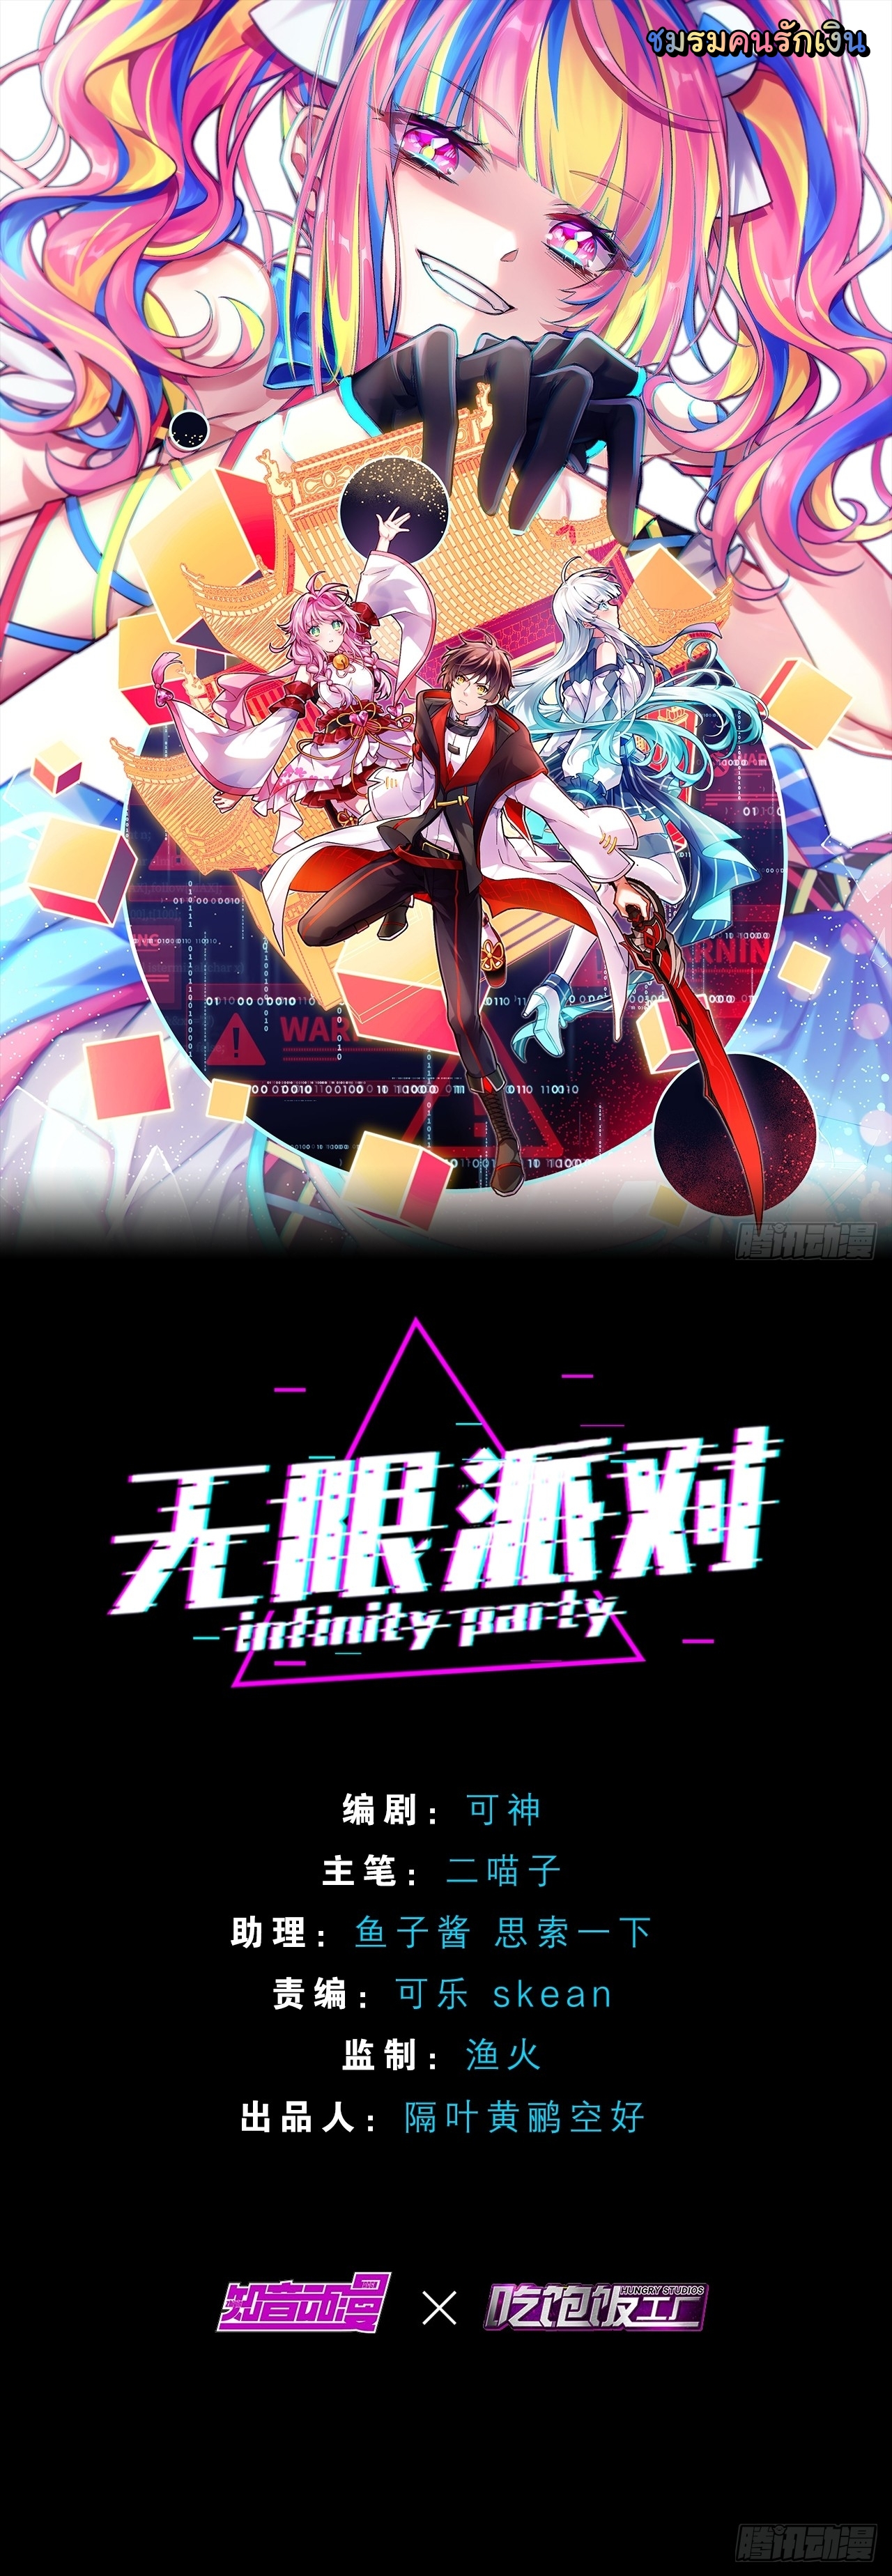 Infinity party 4 (1)